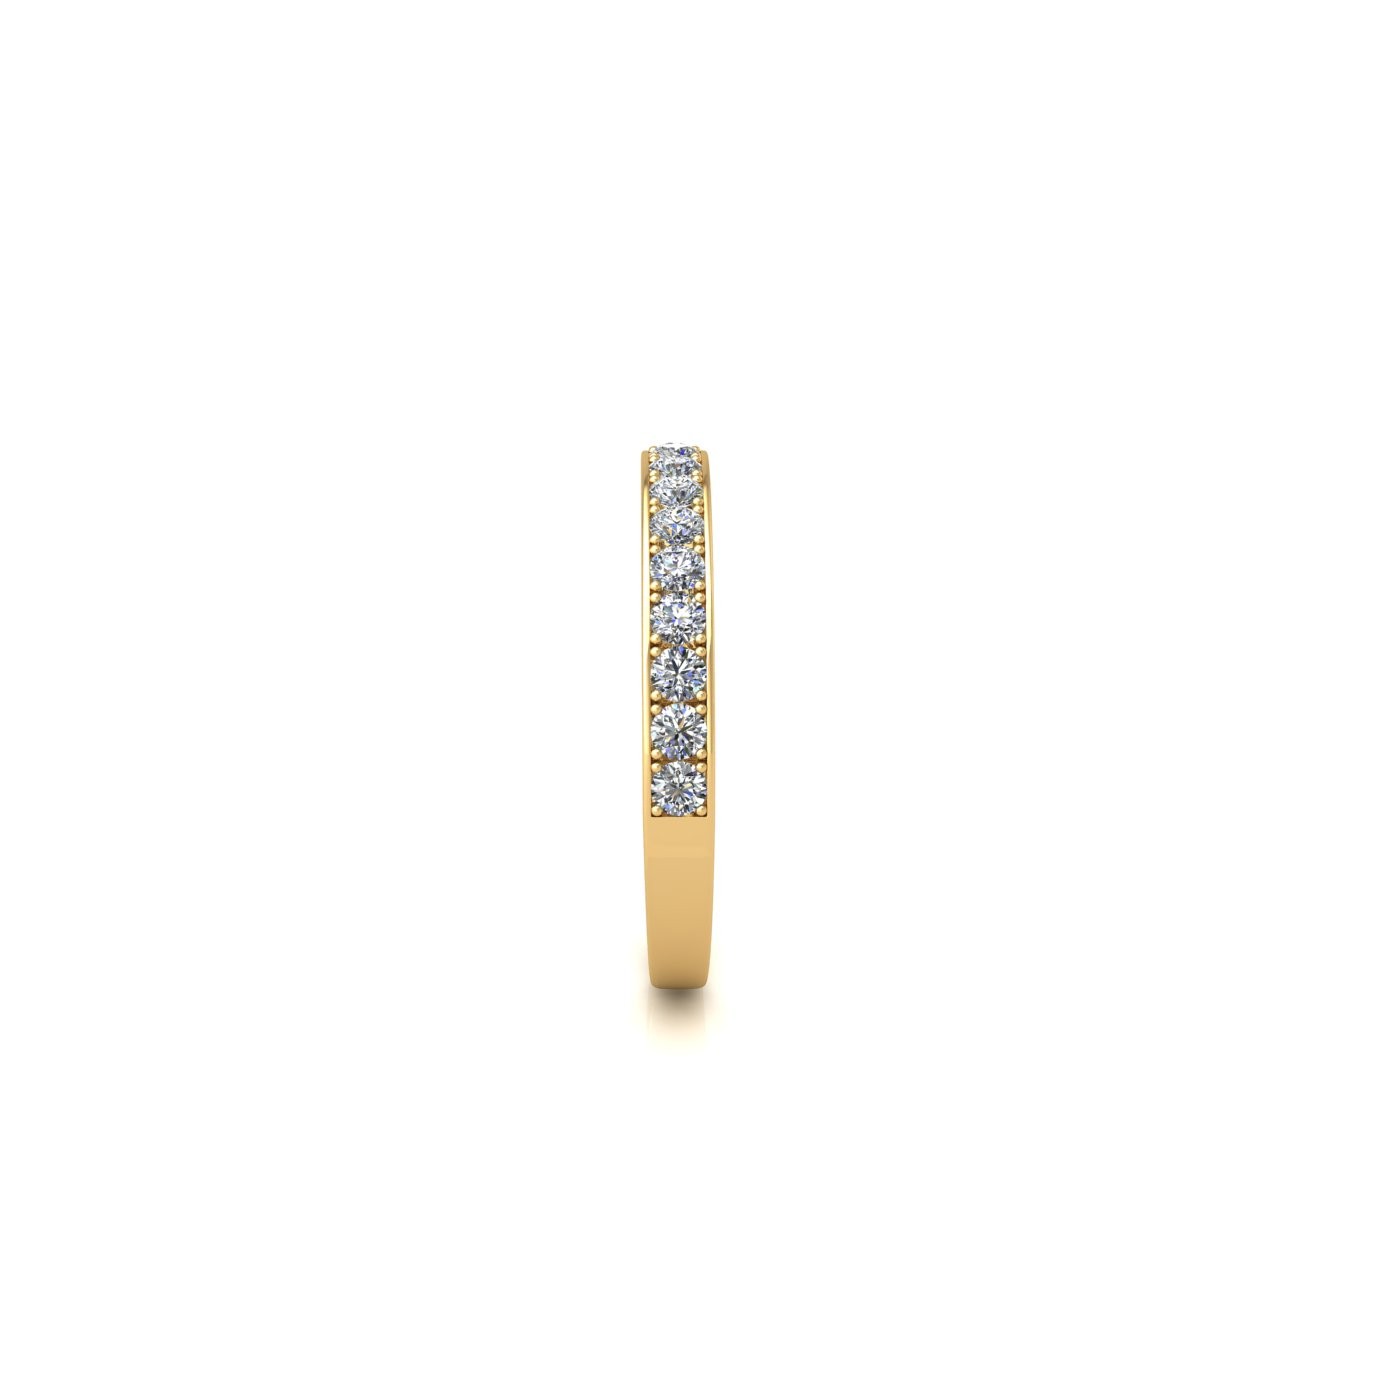 18k yellow gold  round shape diamond channel prong set half eternity ring Photos & images